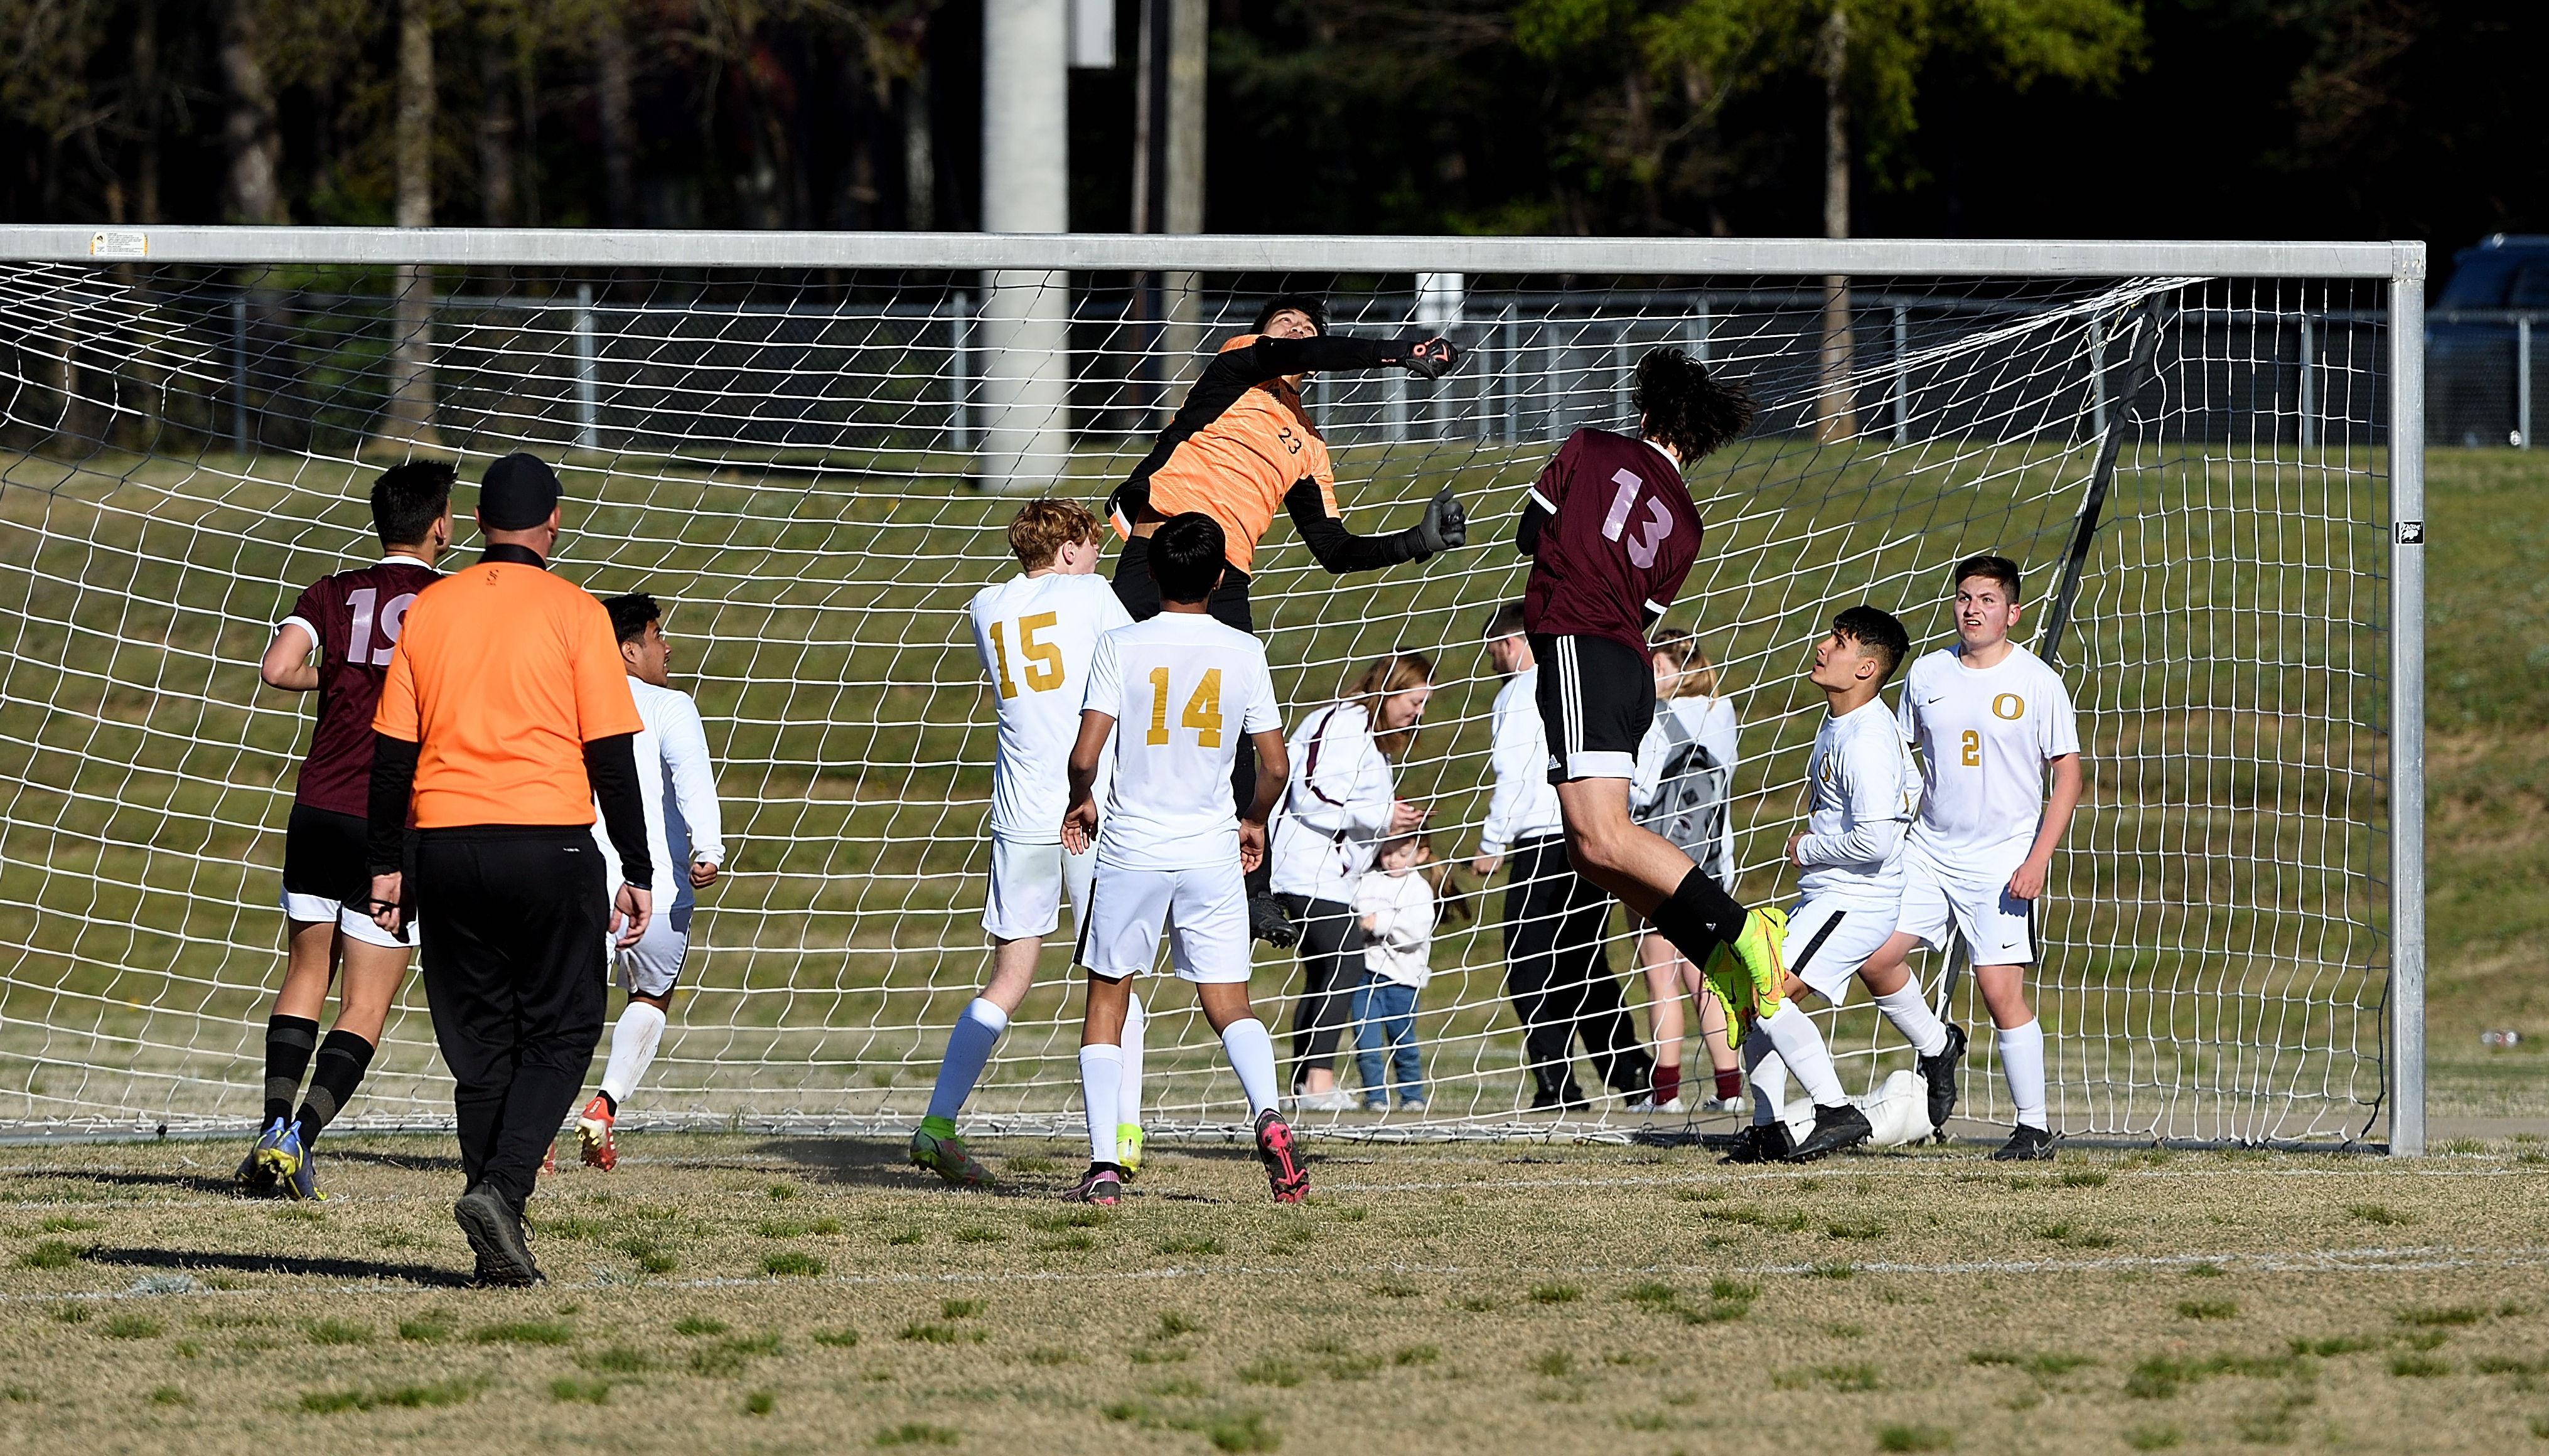 Oxford keeper Carlos Martinez goes high to turn back a shot from Donoho’s Logan Melton (13) in Saturday’s county title game. (Photo by B.J. Franklin/GungHo Photos)